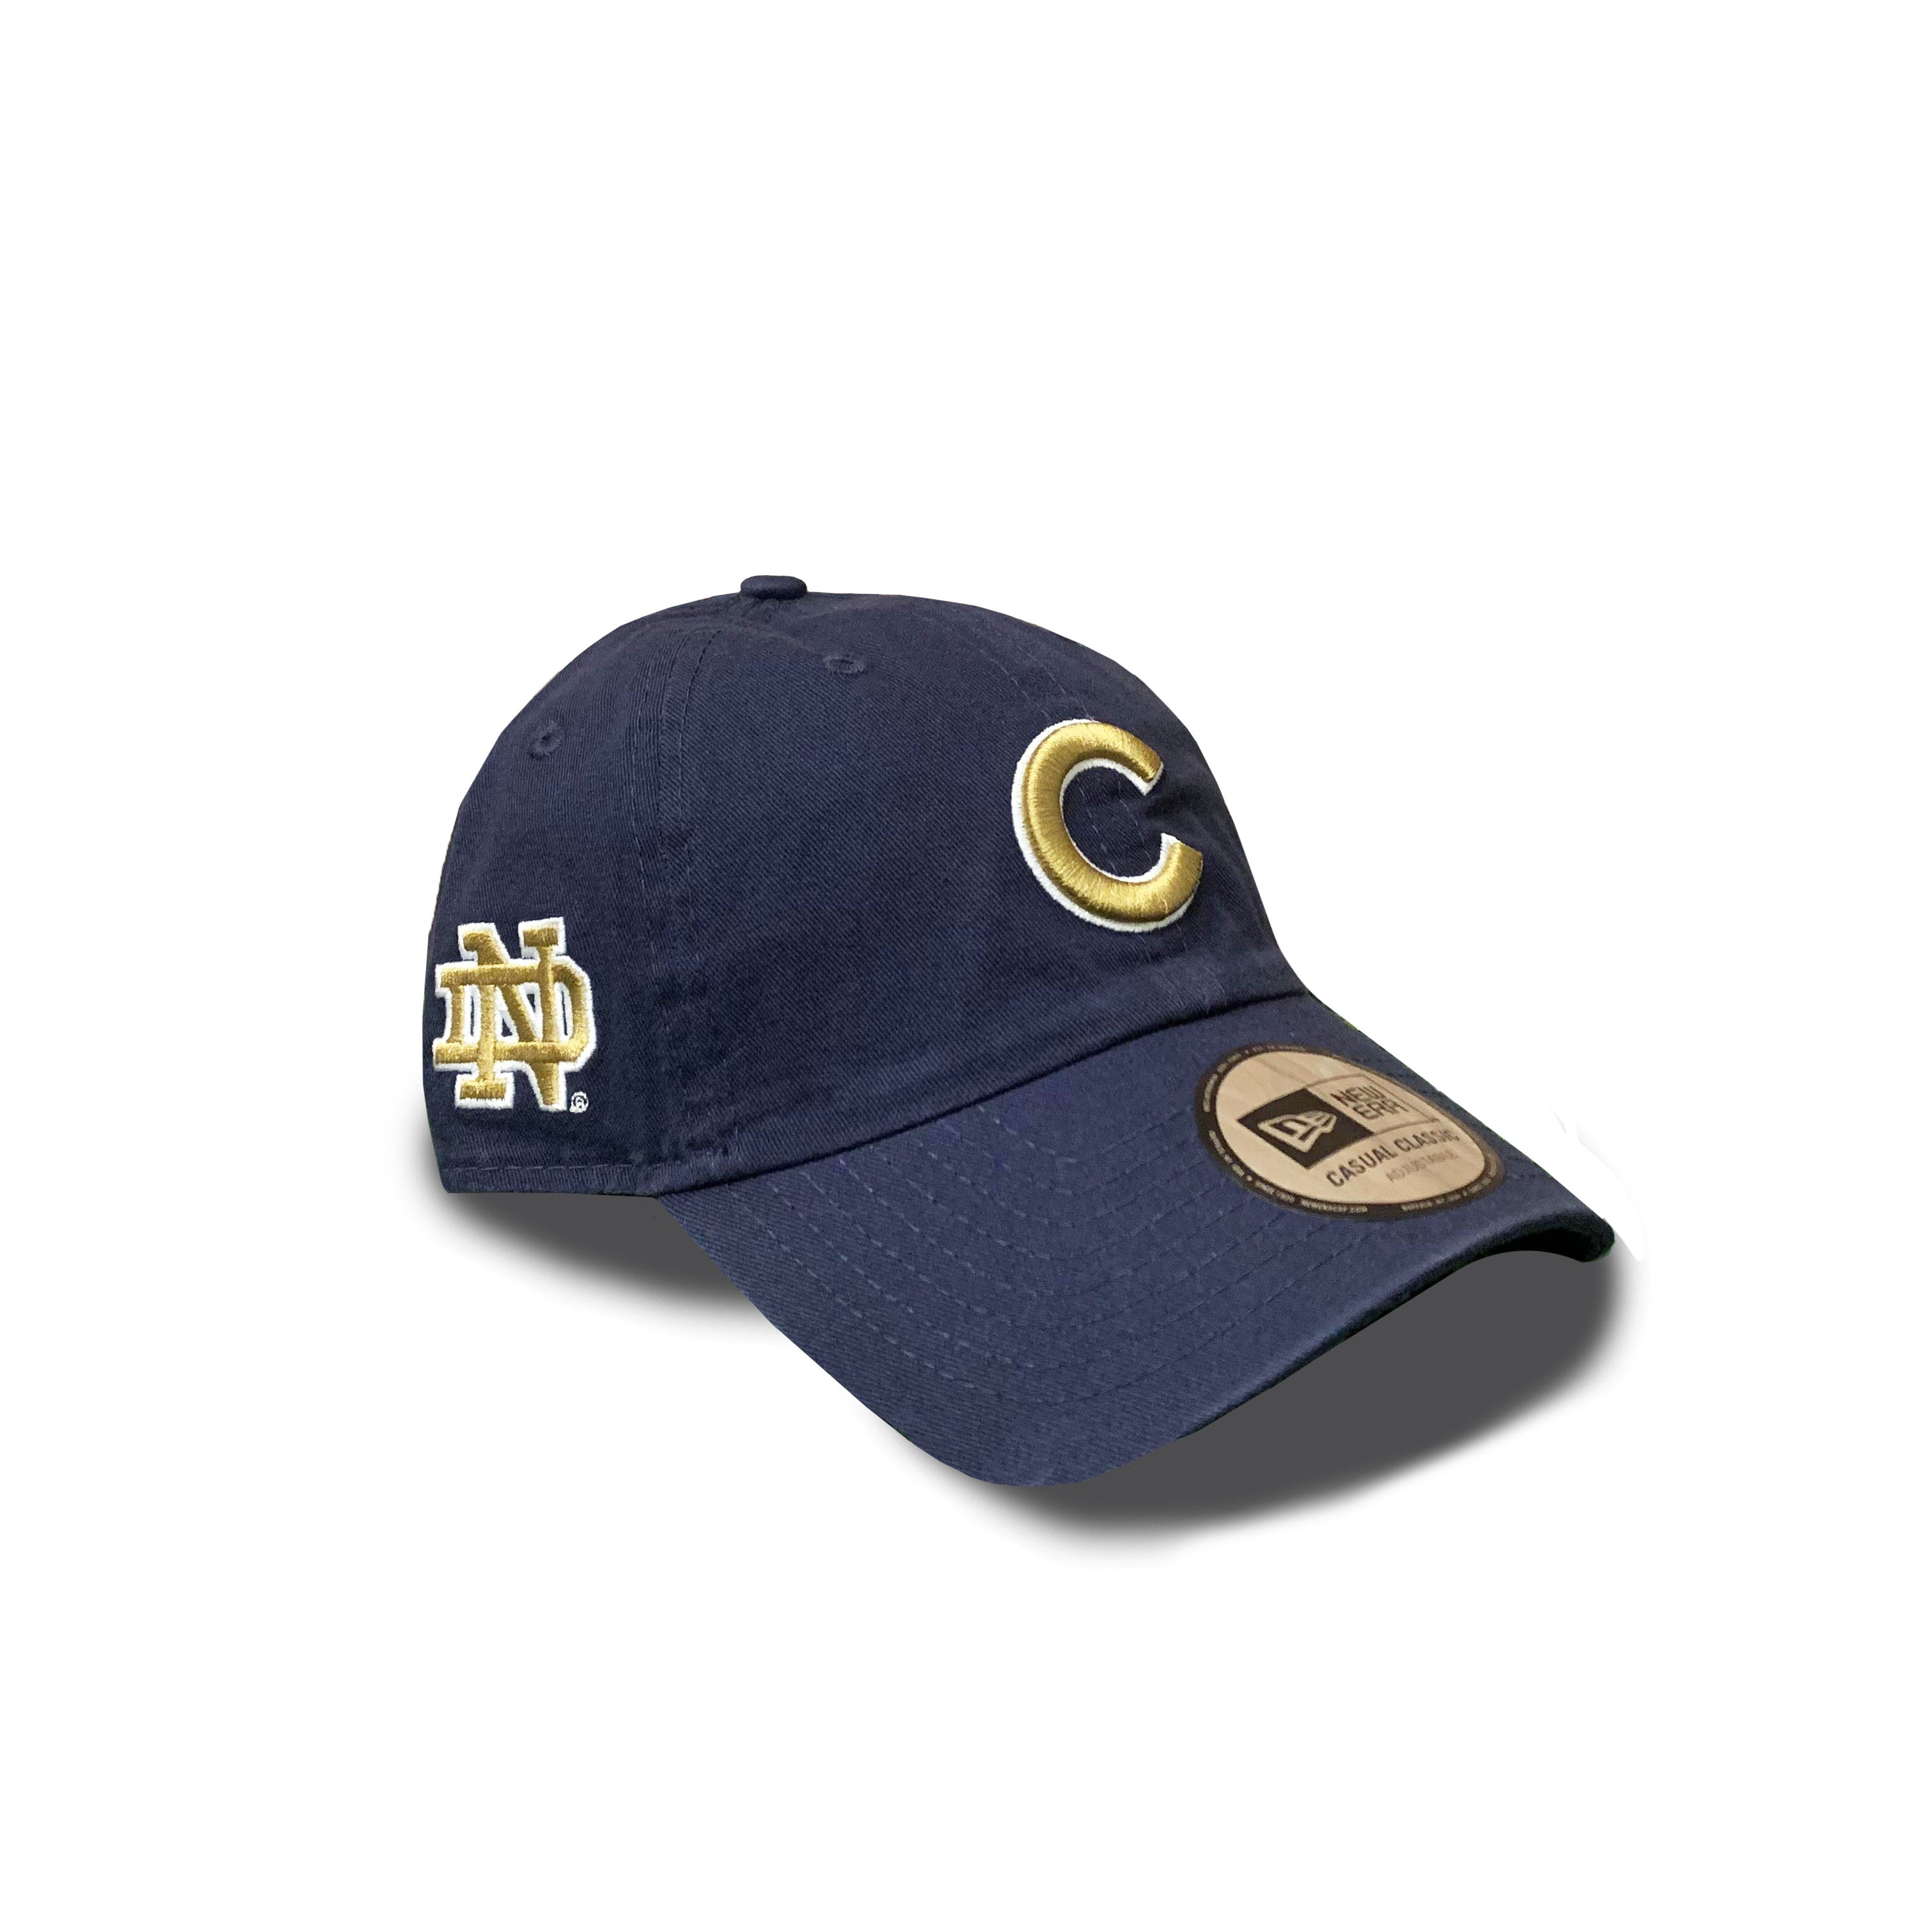 Chicago Cubs and University of Notre Dame New Era Navy Adjustable Cap